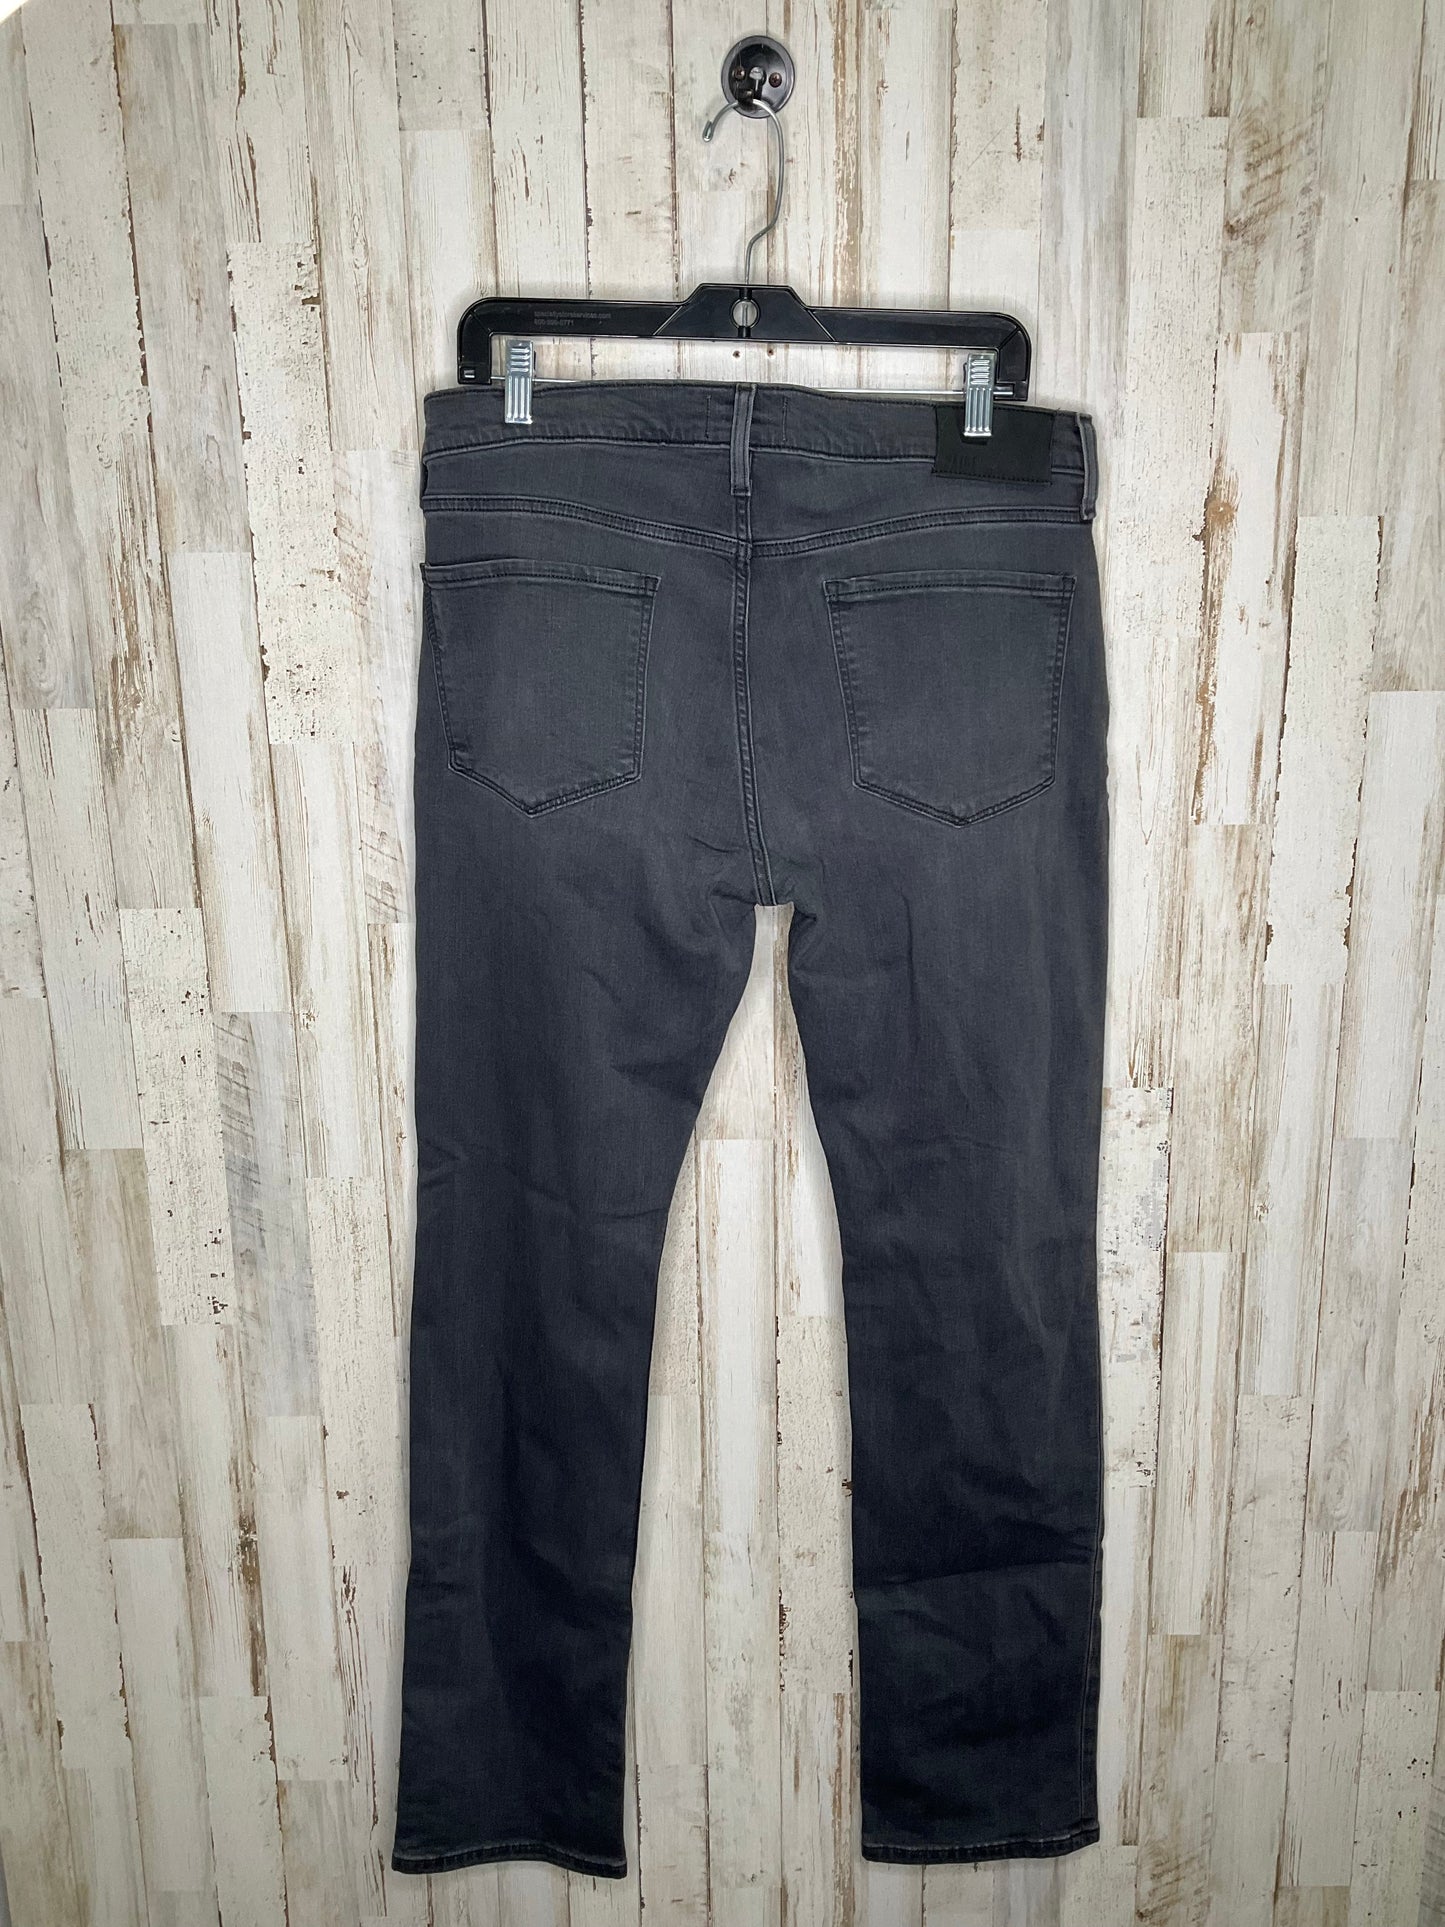 Jeans Skinny By Paige  Size: 16